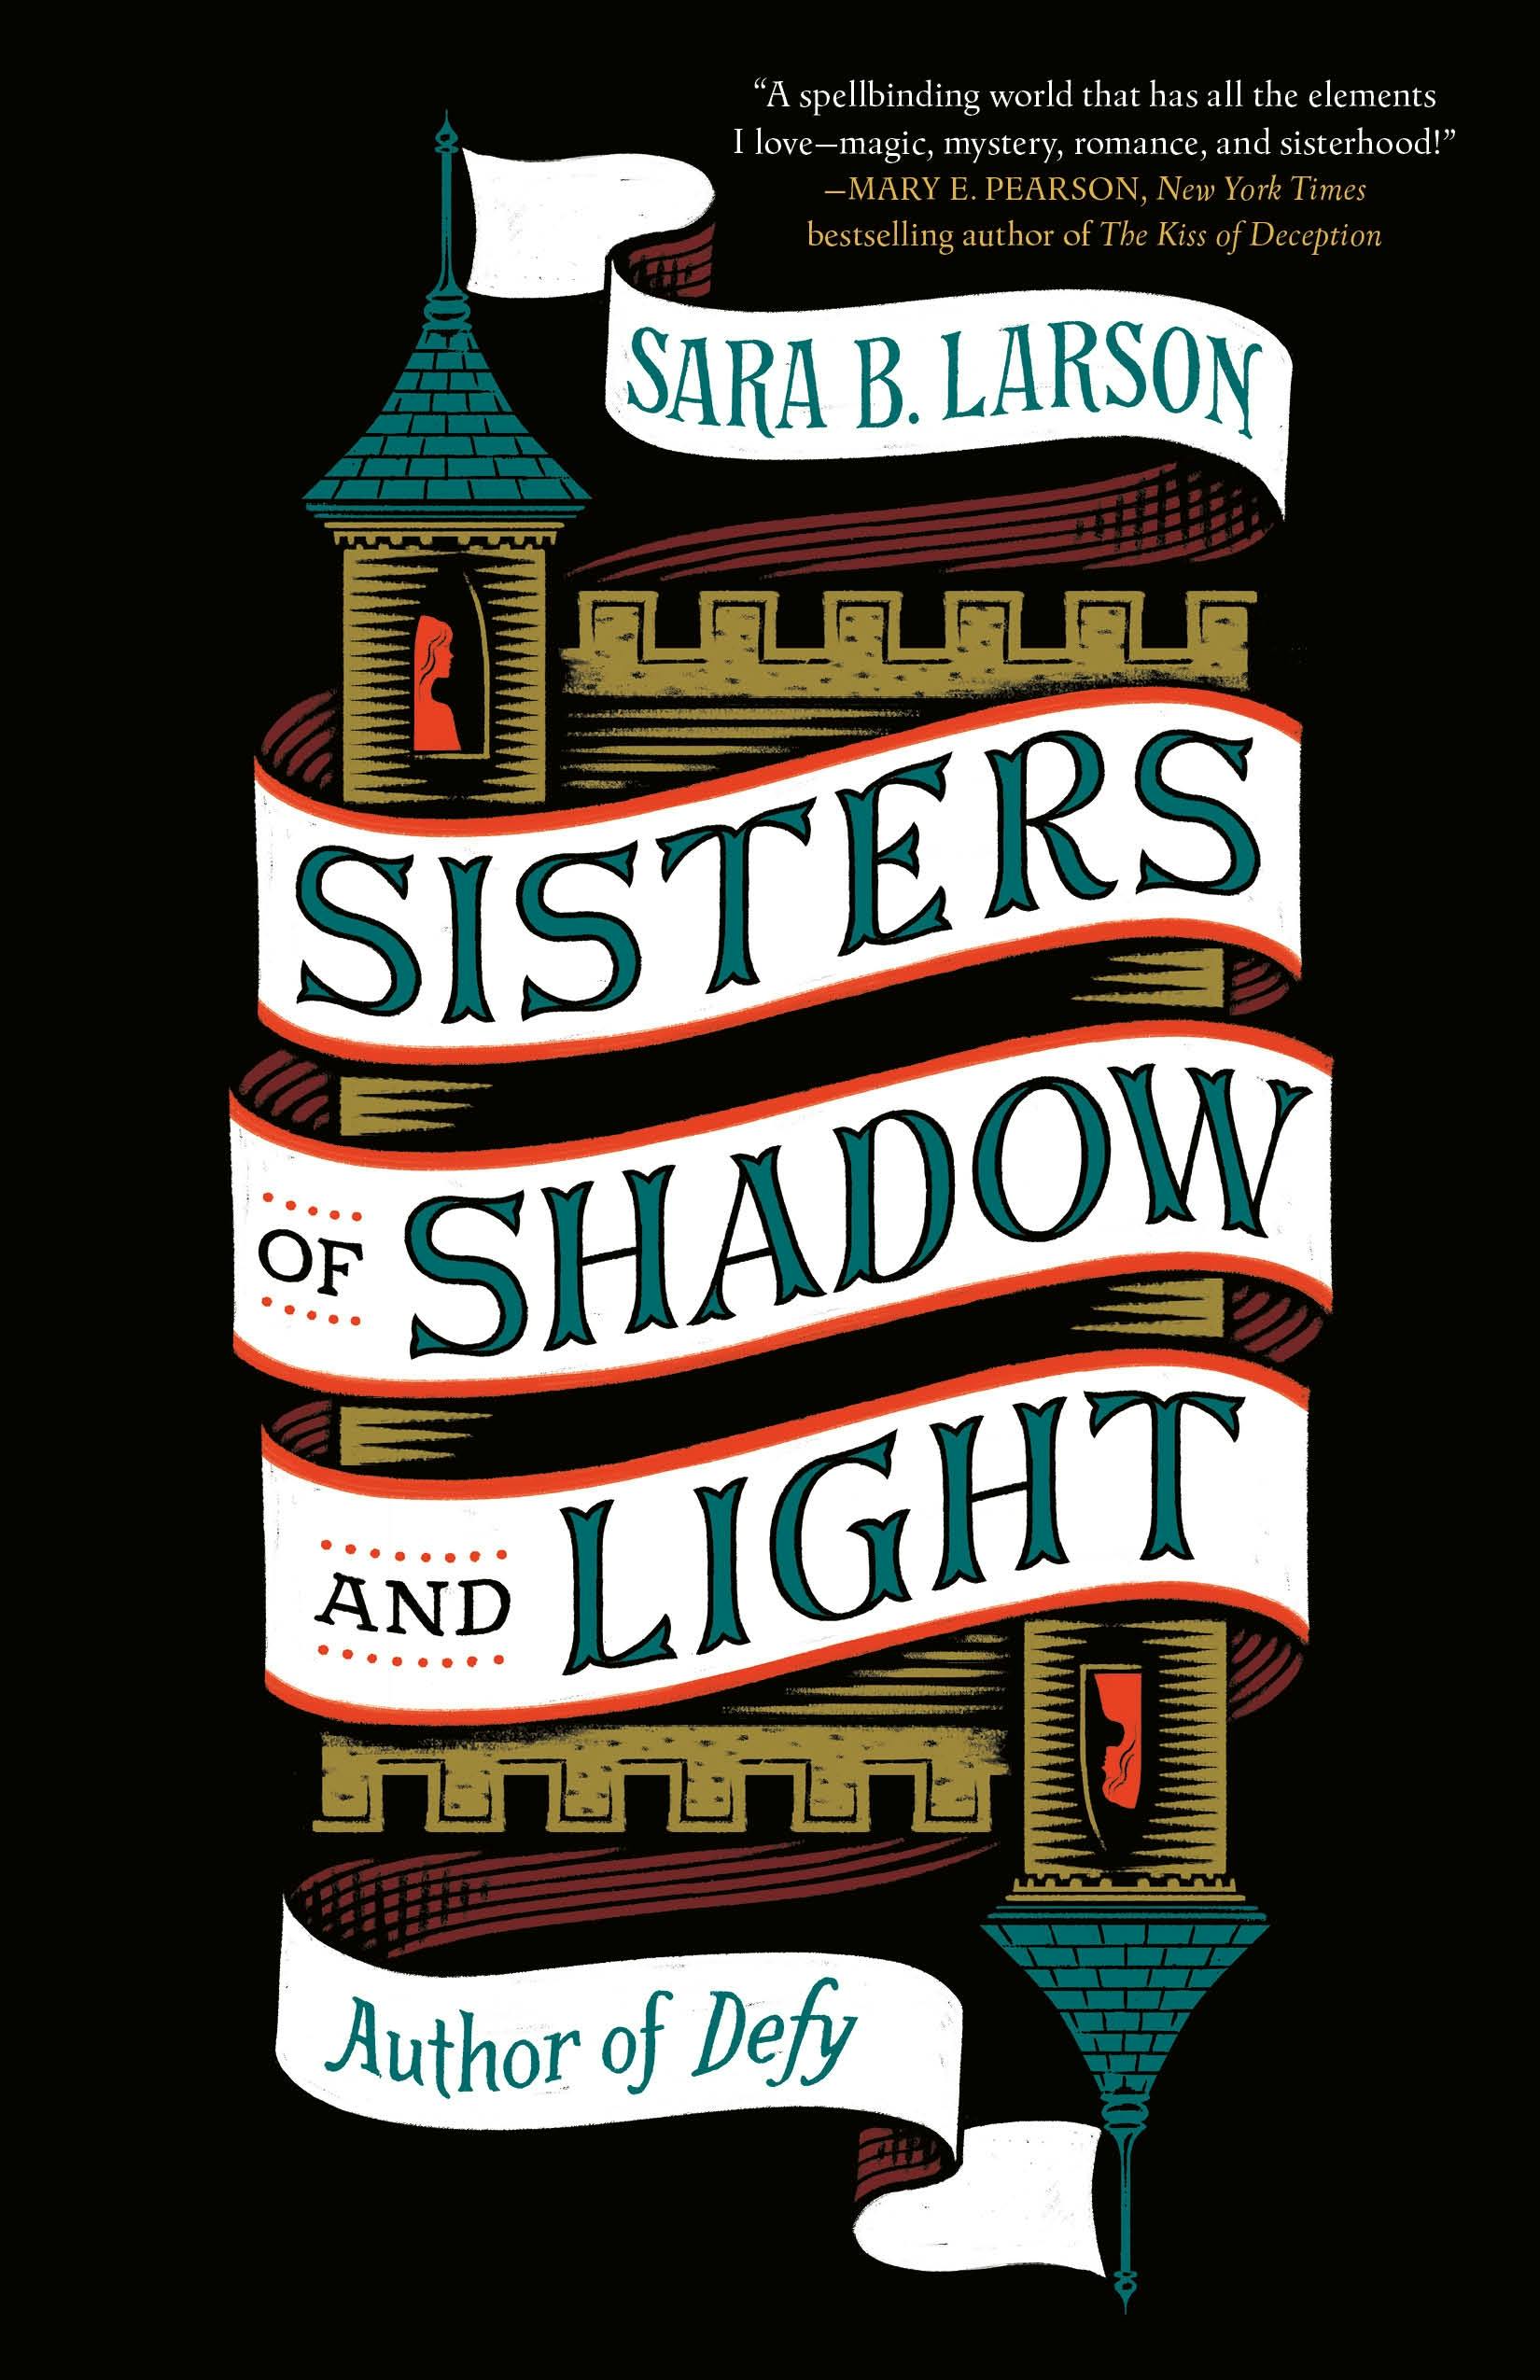 Cover for the book titled as: Sisters of Shadow and Light